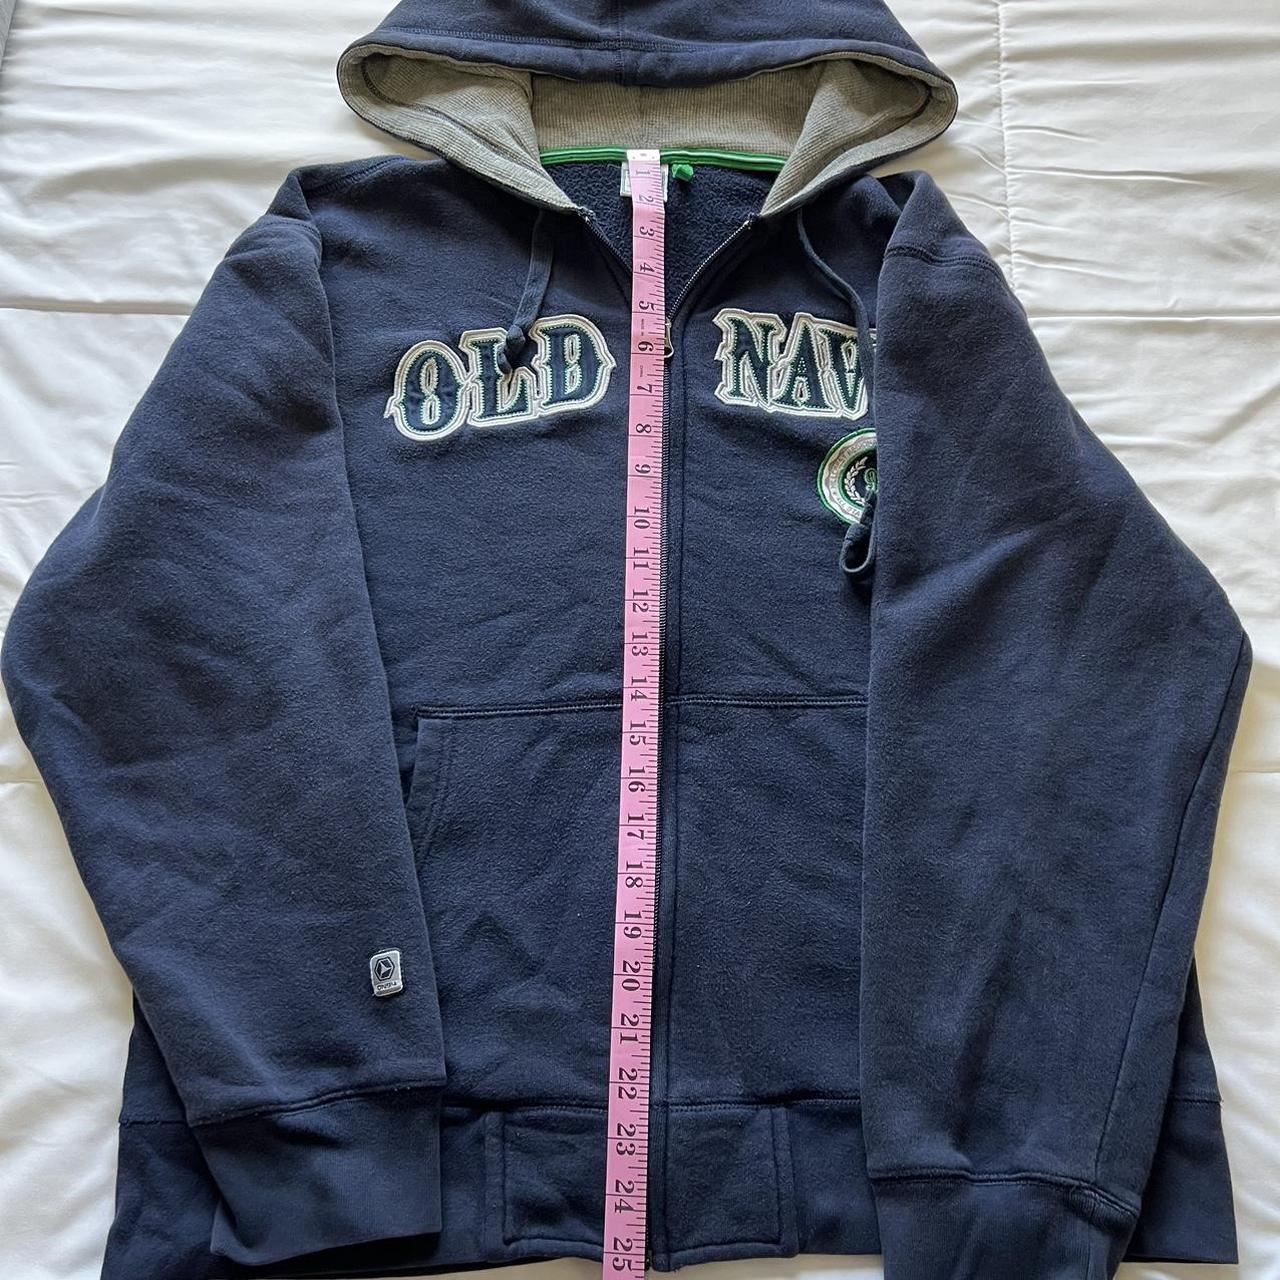 Old Navy Men's Navy and Blue Jacket (2)